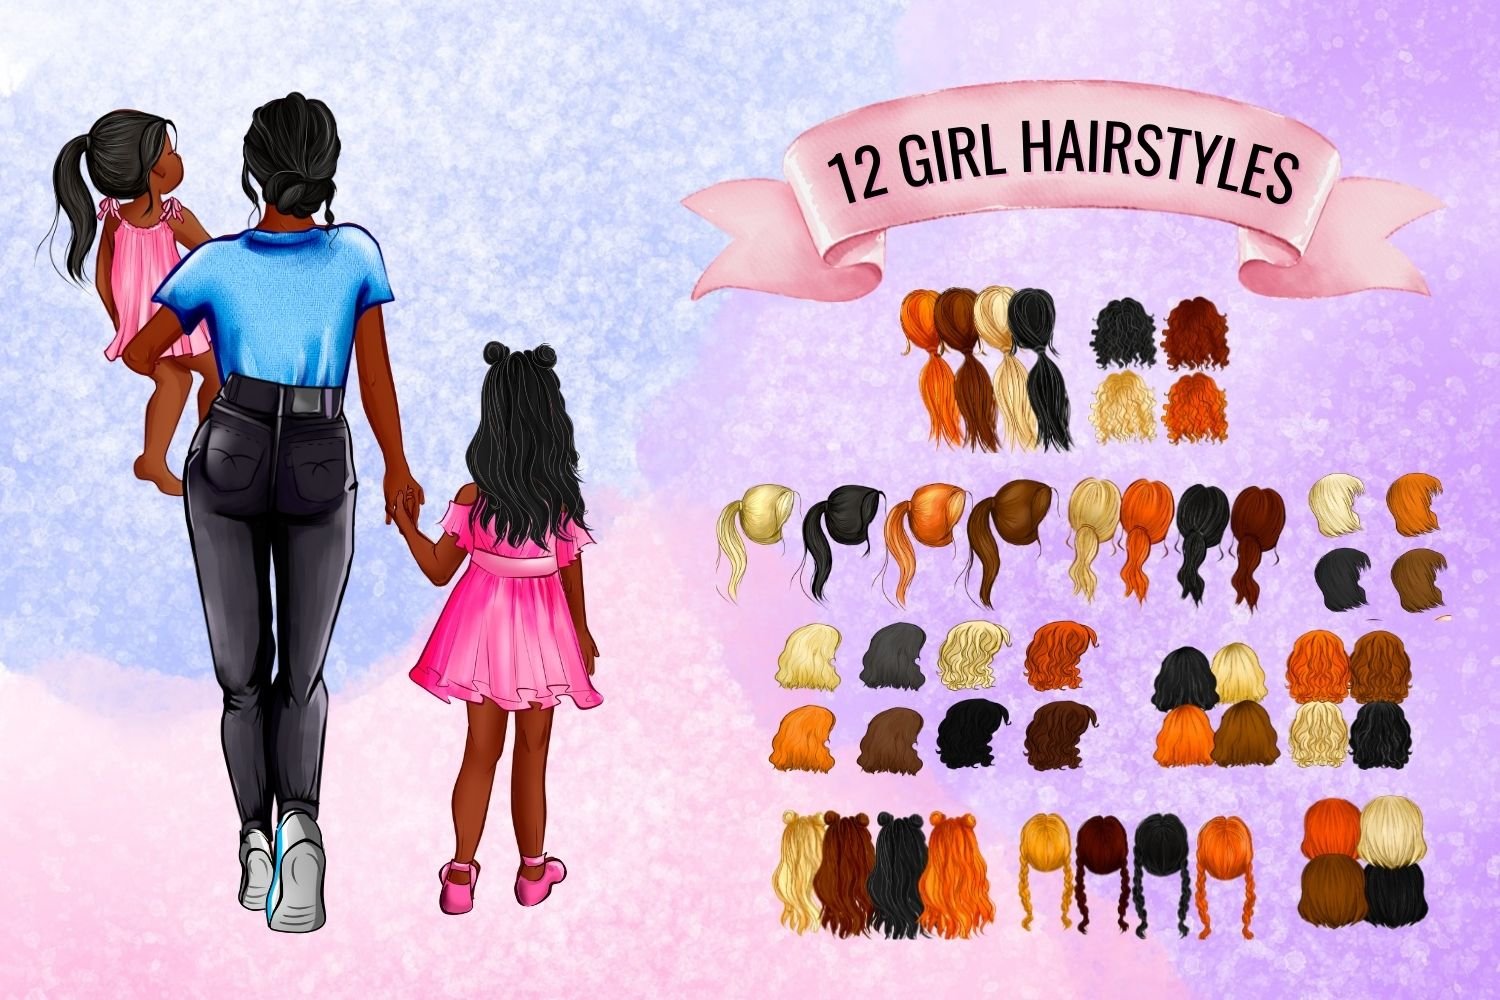 Girl hairstyle collection.